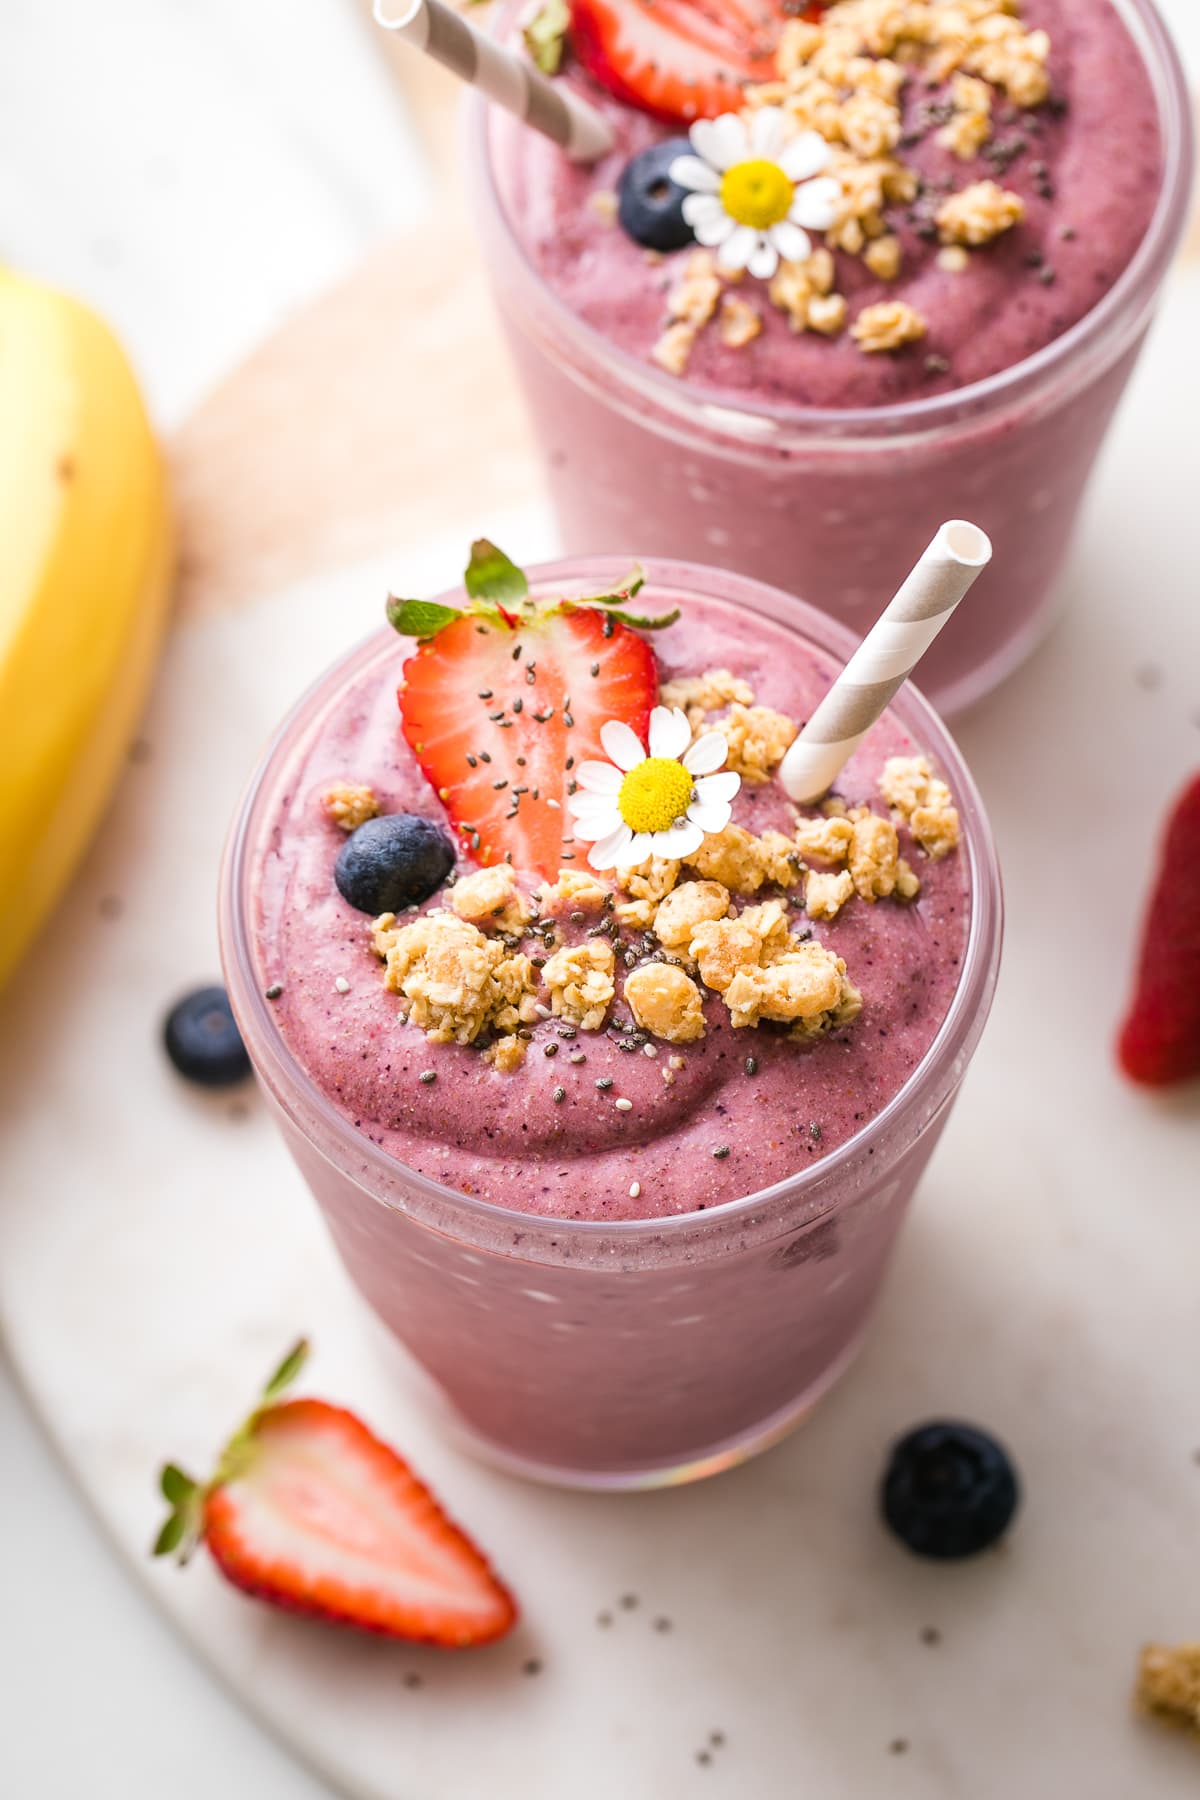 Can You Put Chia Seeds In Smoothies? 